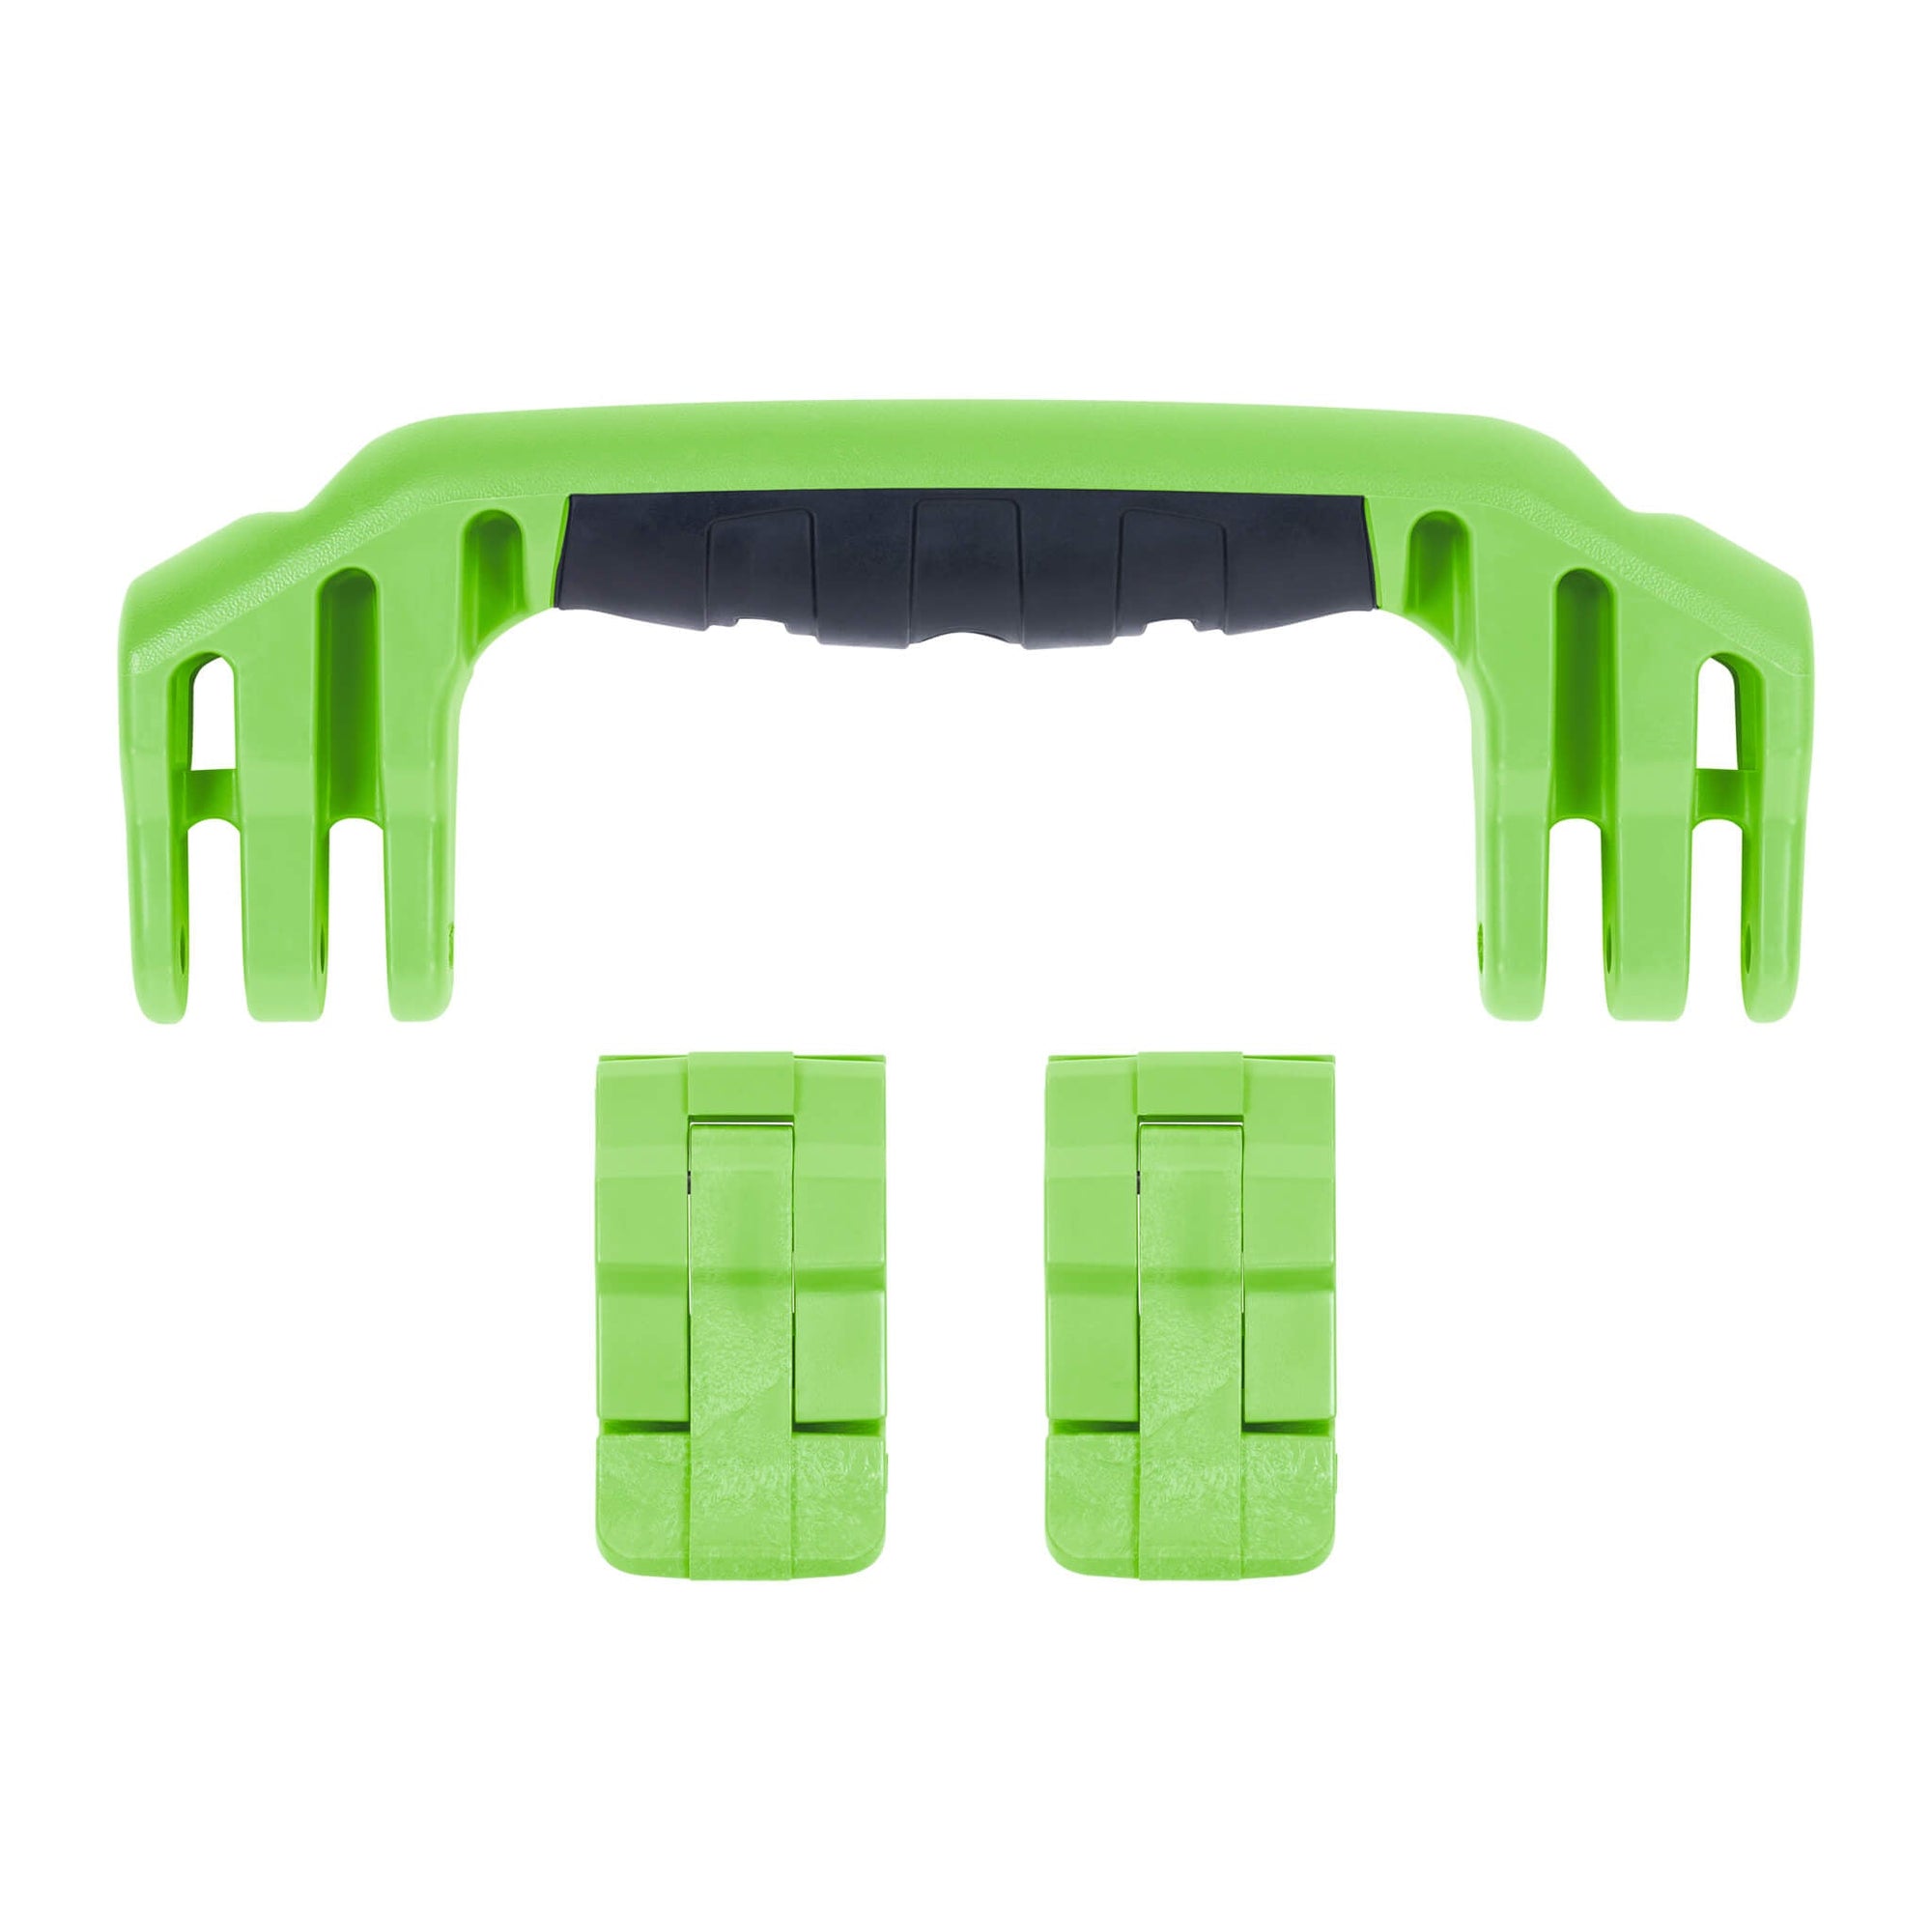 Pelican 1450 Replacement Handle & Latches, Lime Green (Set of 1 Handle, 2 Latches) ColorCase 